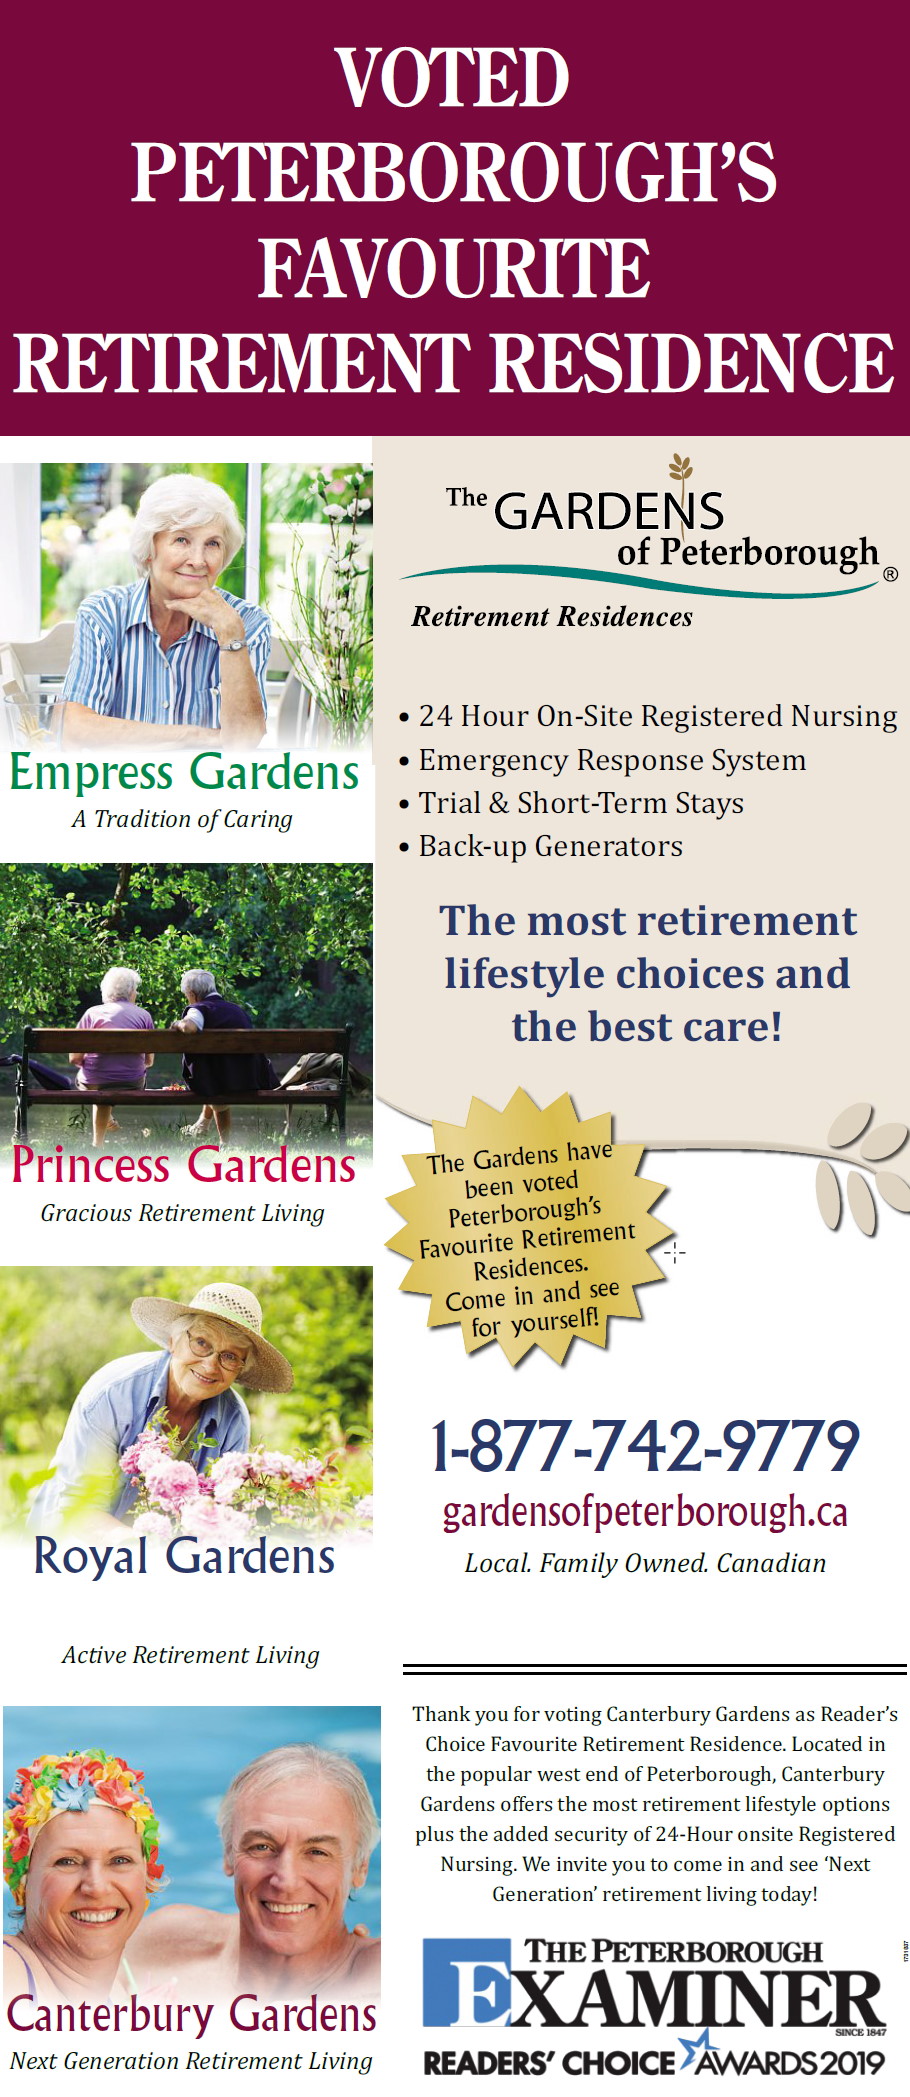 The Gardens Quality Retirement And Lifestyle Options In